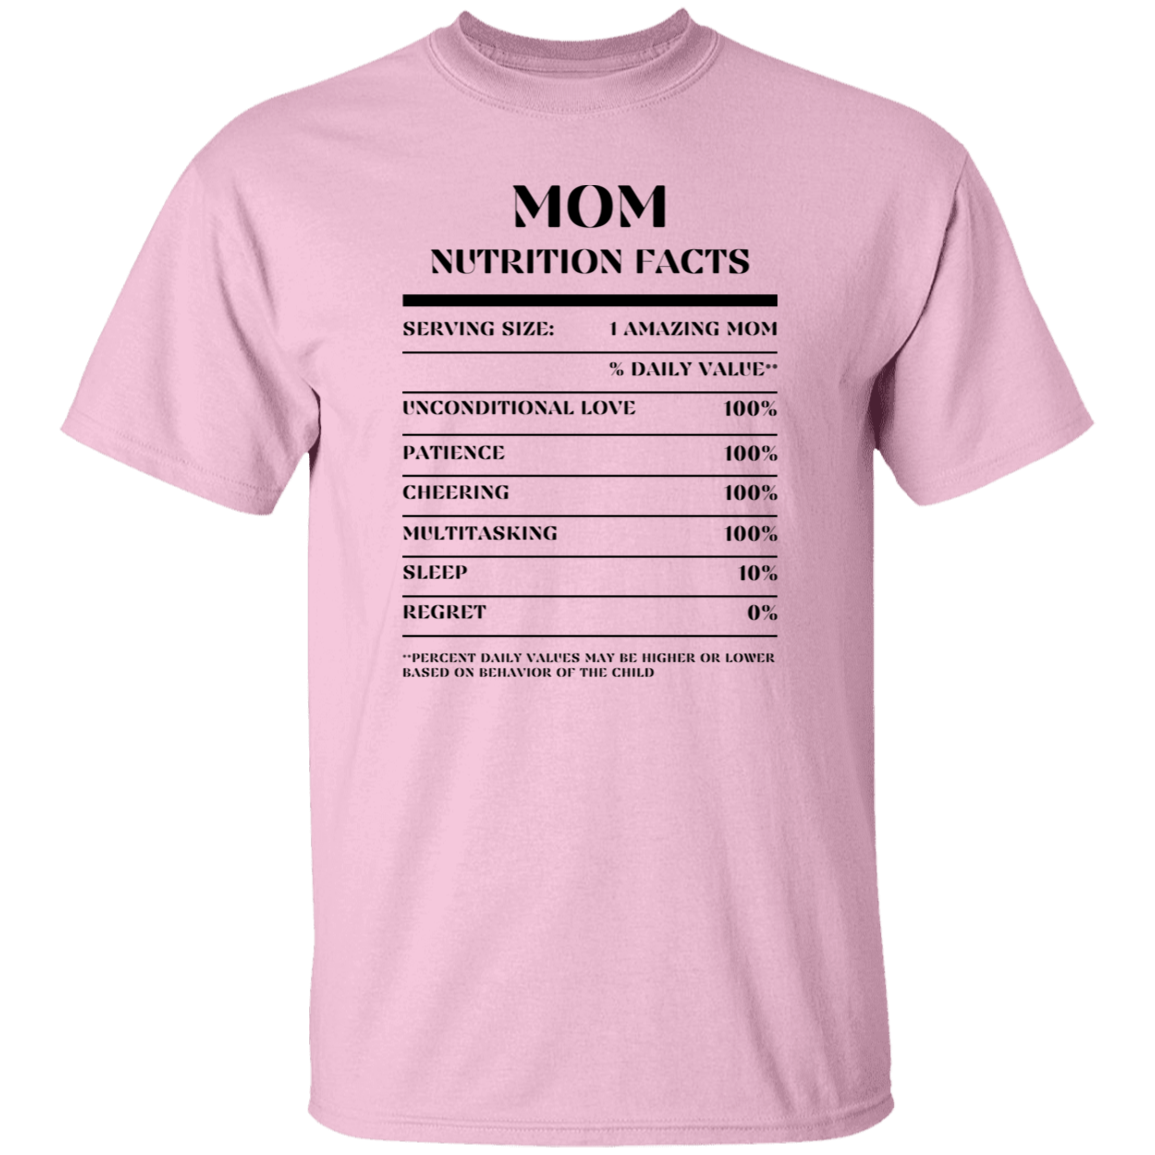 Nutrition Facts T-Shirt SS - Mom - Black